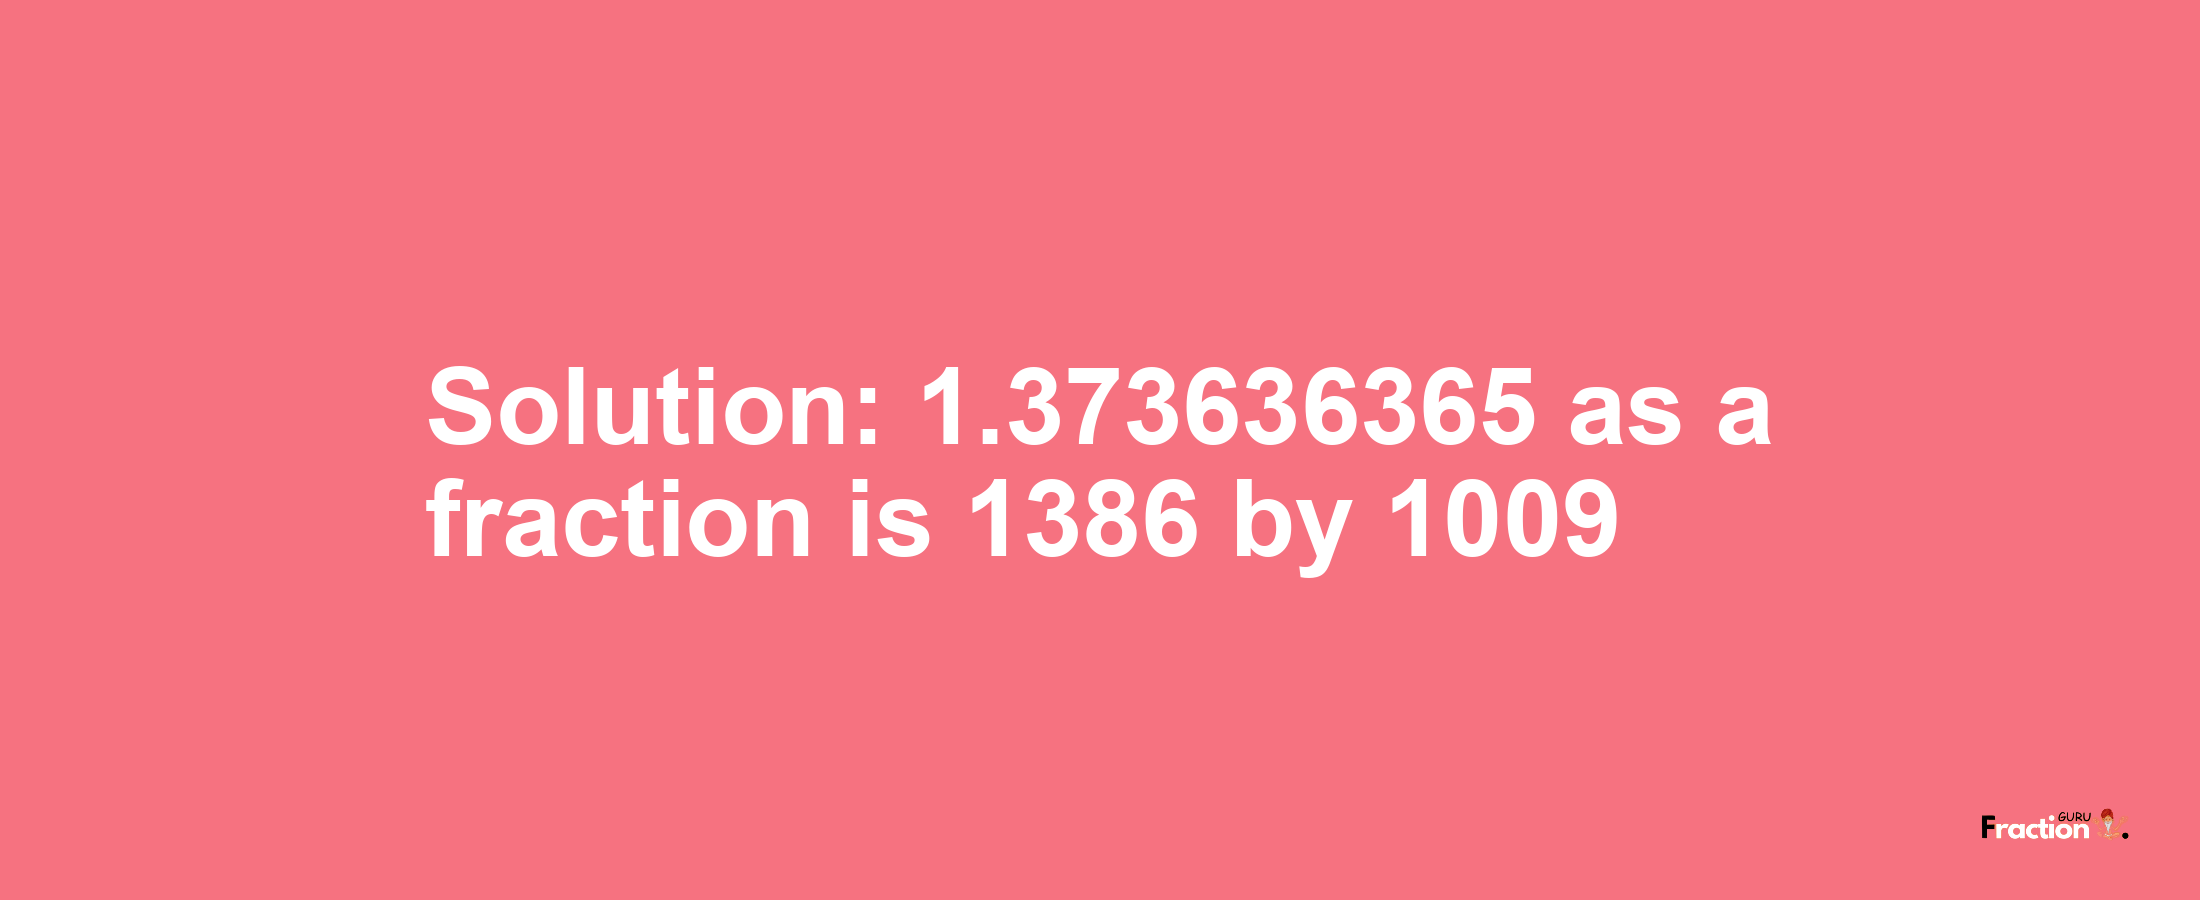 Solution:1.373636365 as a fraction is 1386/1009